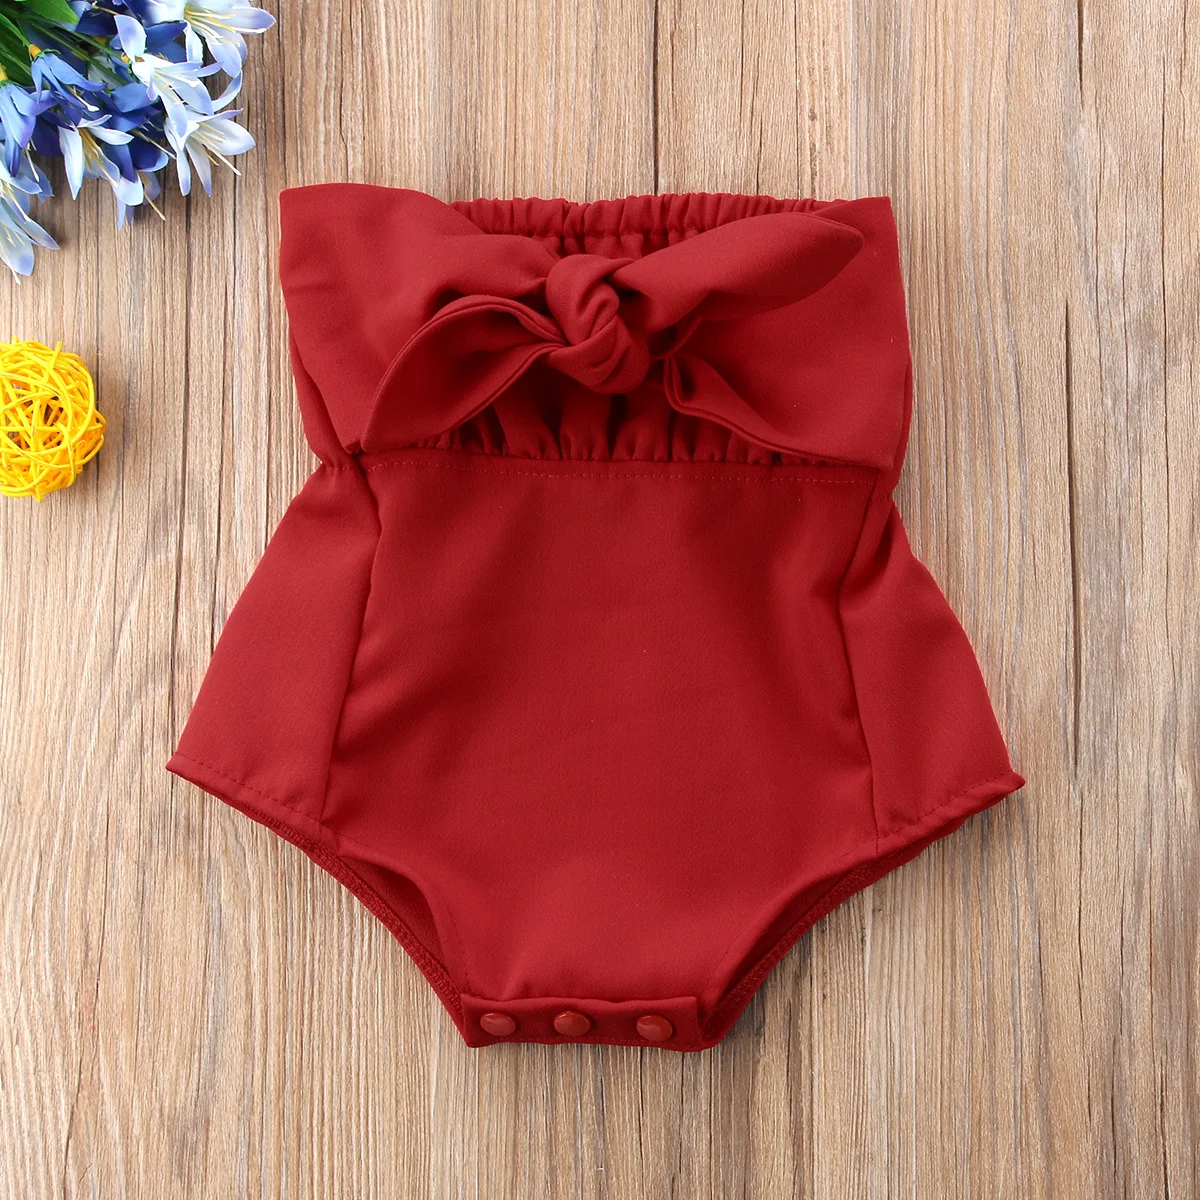 

Baby Girl's Hollow Out Off Shoulder Romper with Bowknot Ruffle Bodysuit Top One-Piece Jumpsuit Outfits